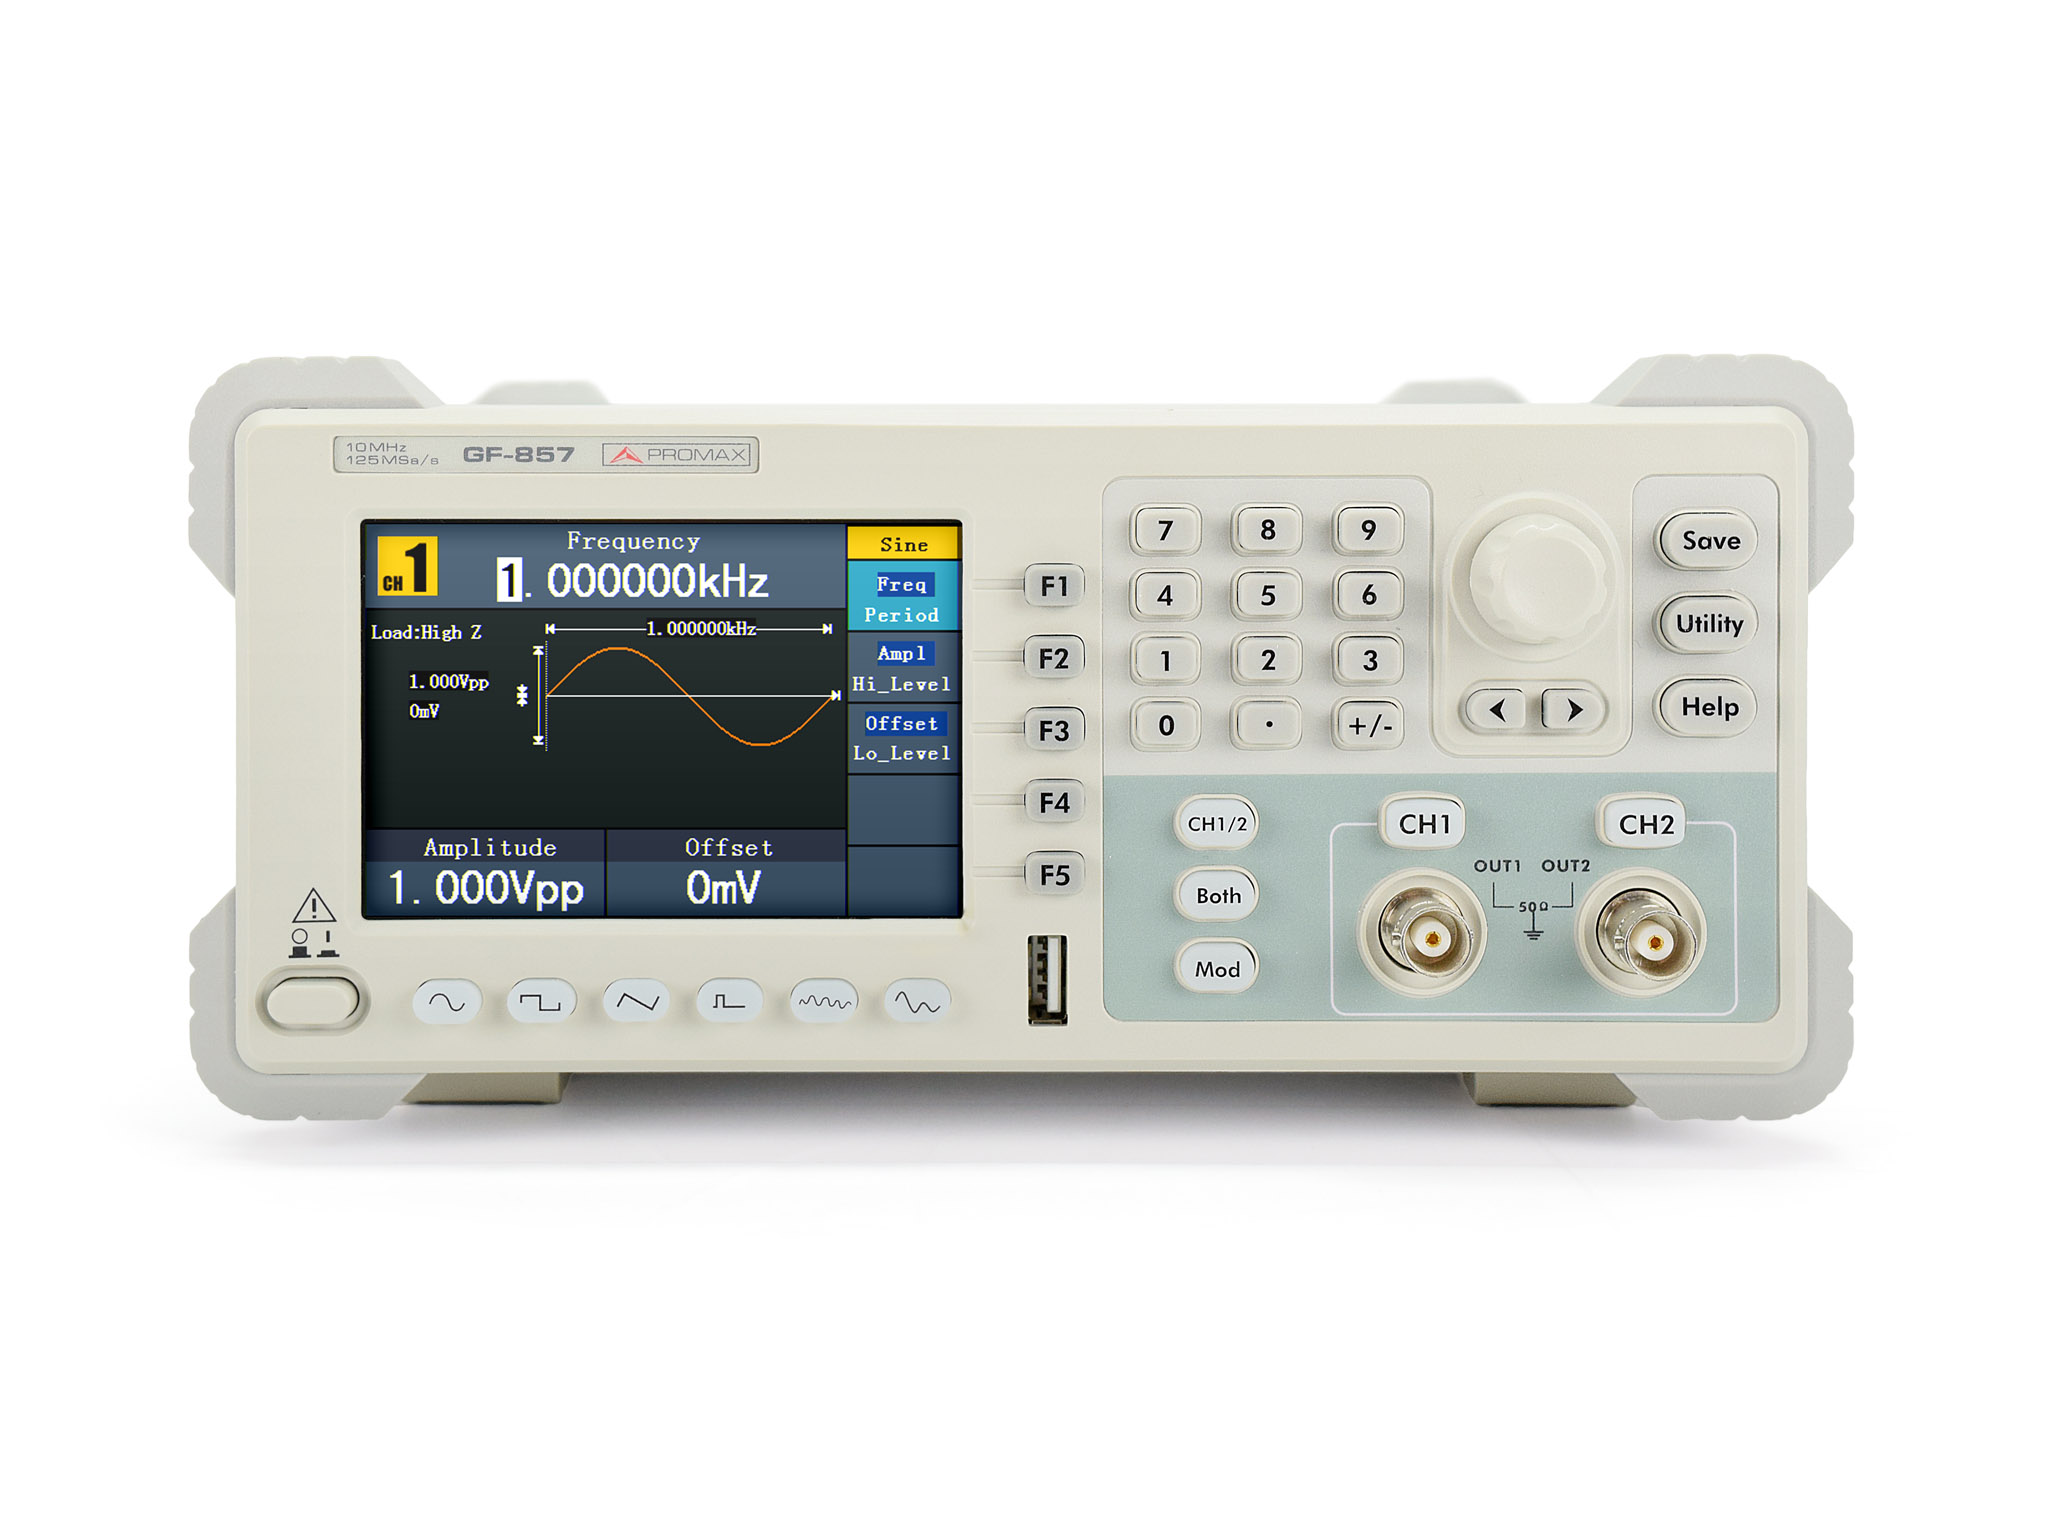 GF-857 B: 10 MHz Arbitrary waveform generator with USB and RS-232